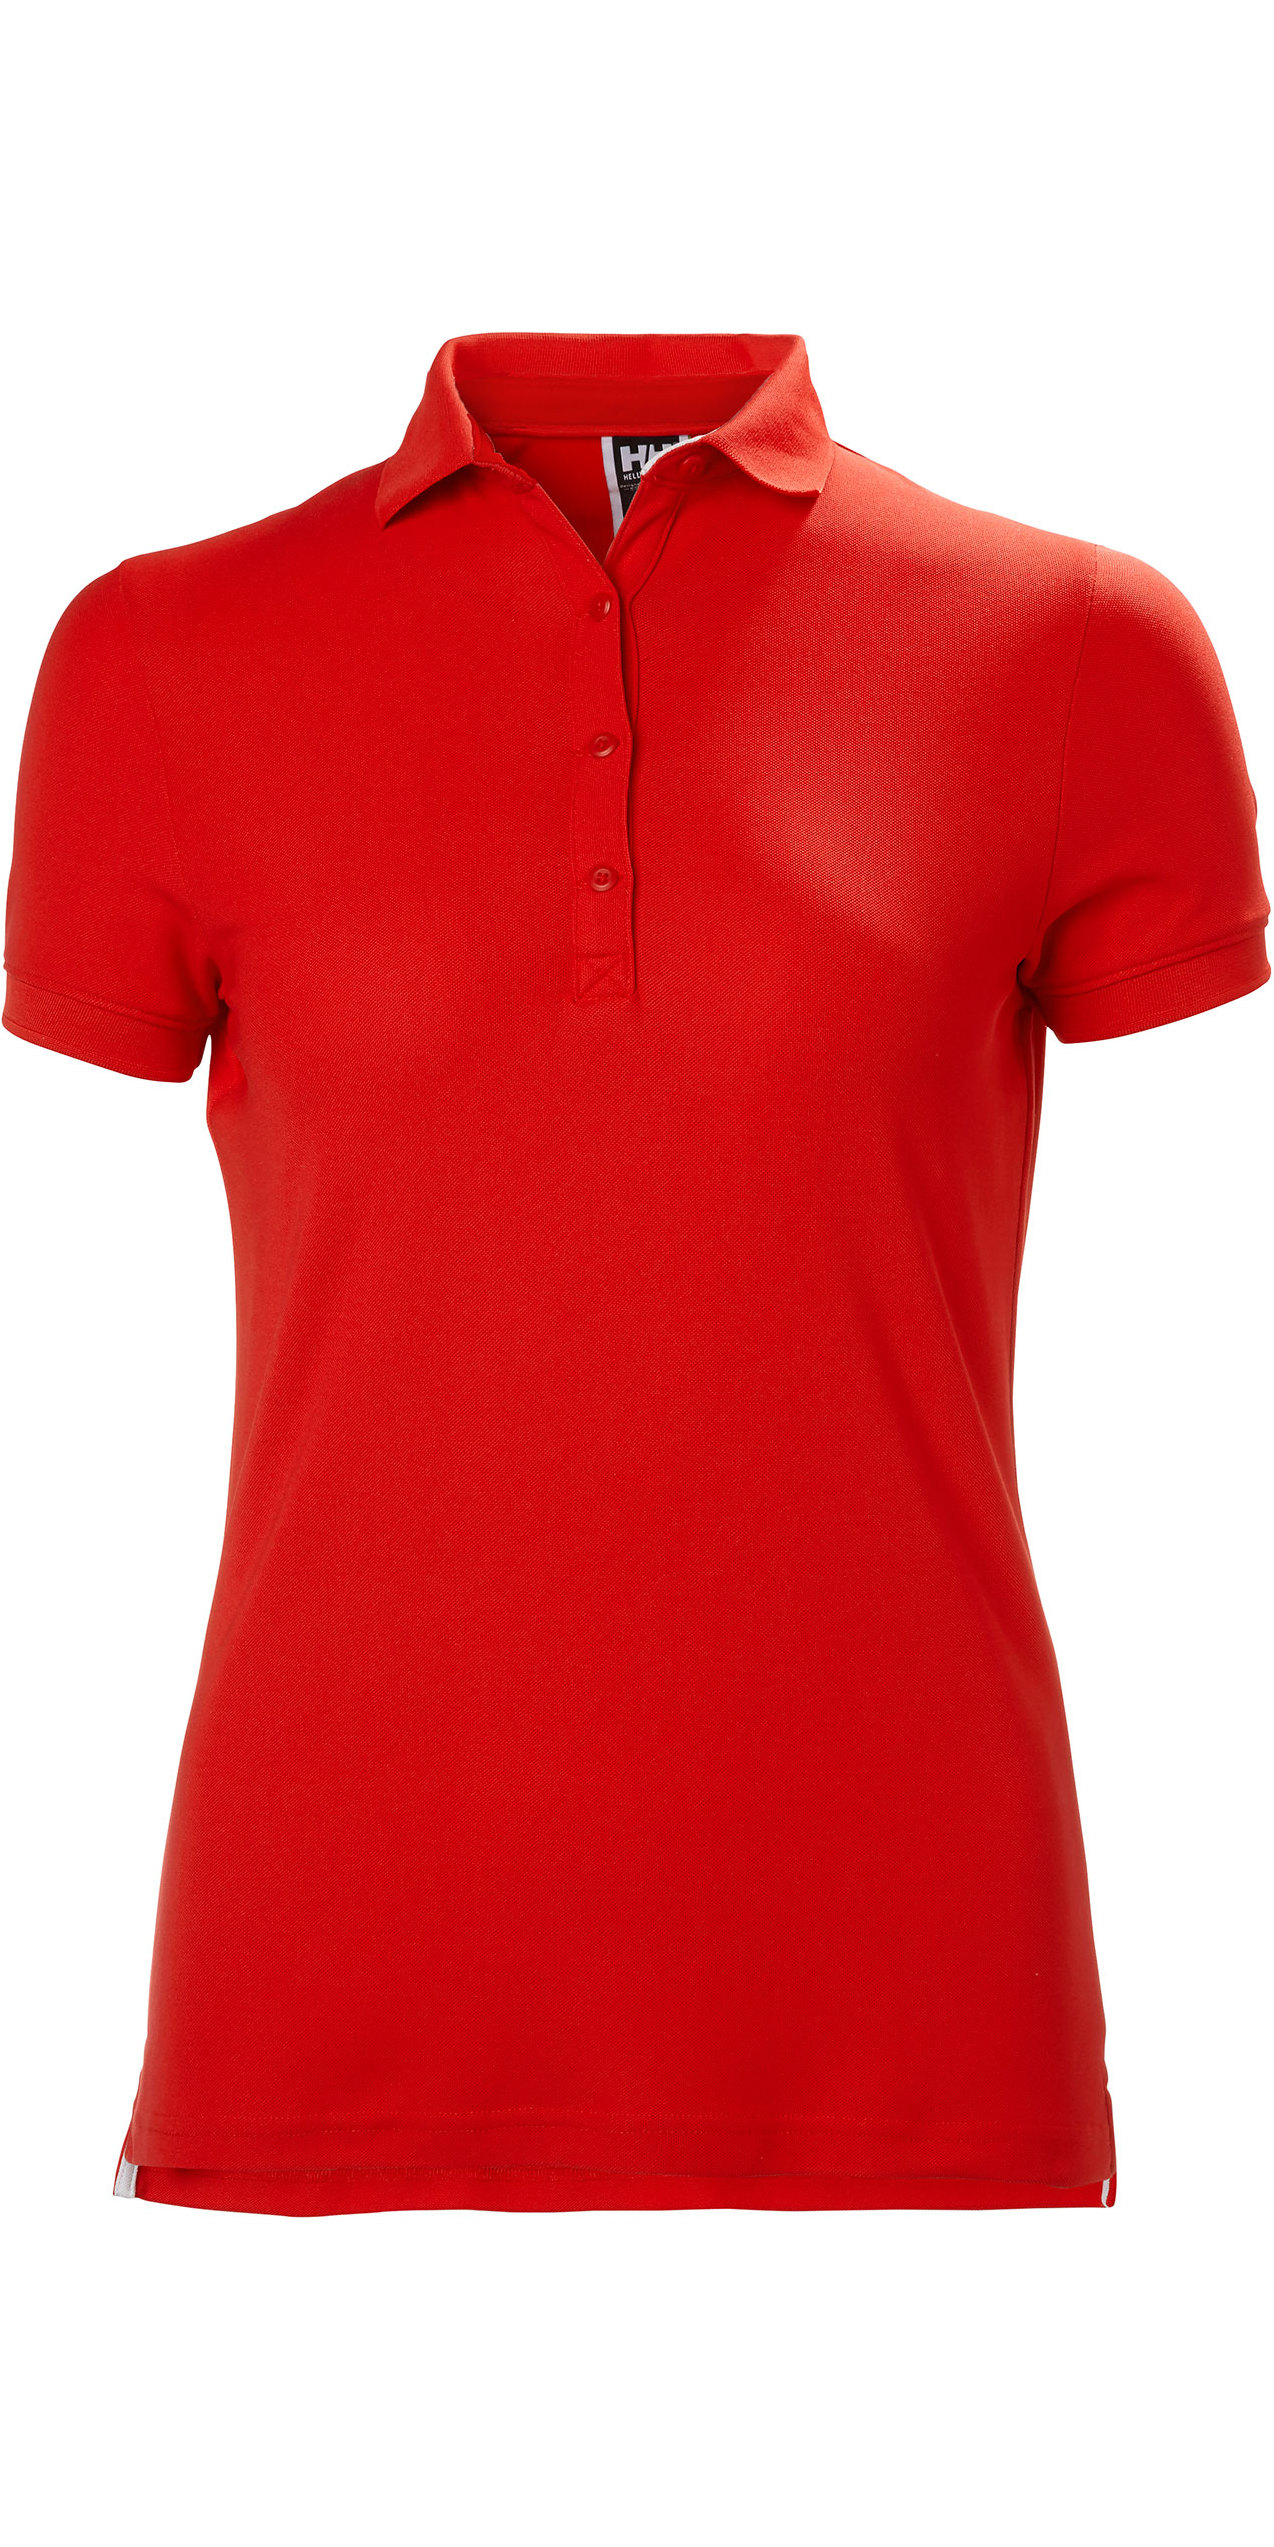 Hobart Bestaan Vochtig 2023 Helly Hansen Womens Crewline Polo Shirt 53049 - Flag Red - Sailing -  Sailing | Watersports Outlet